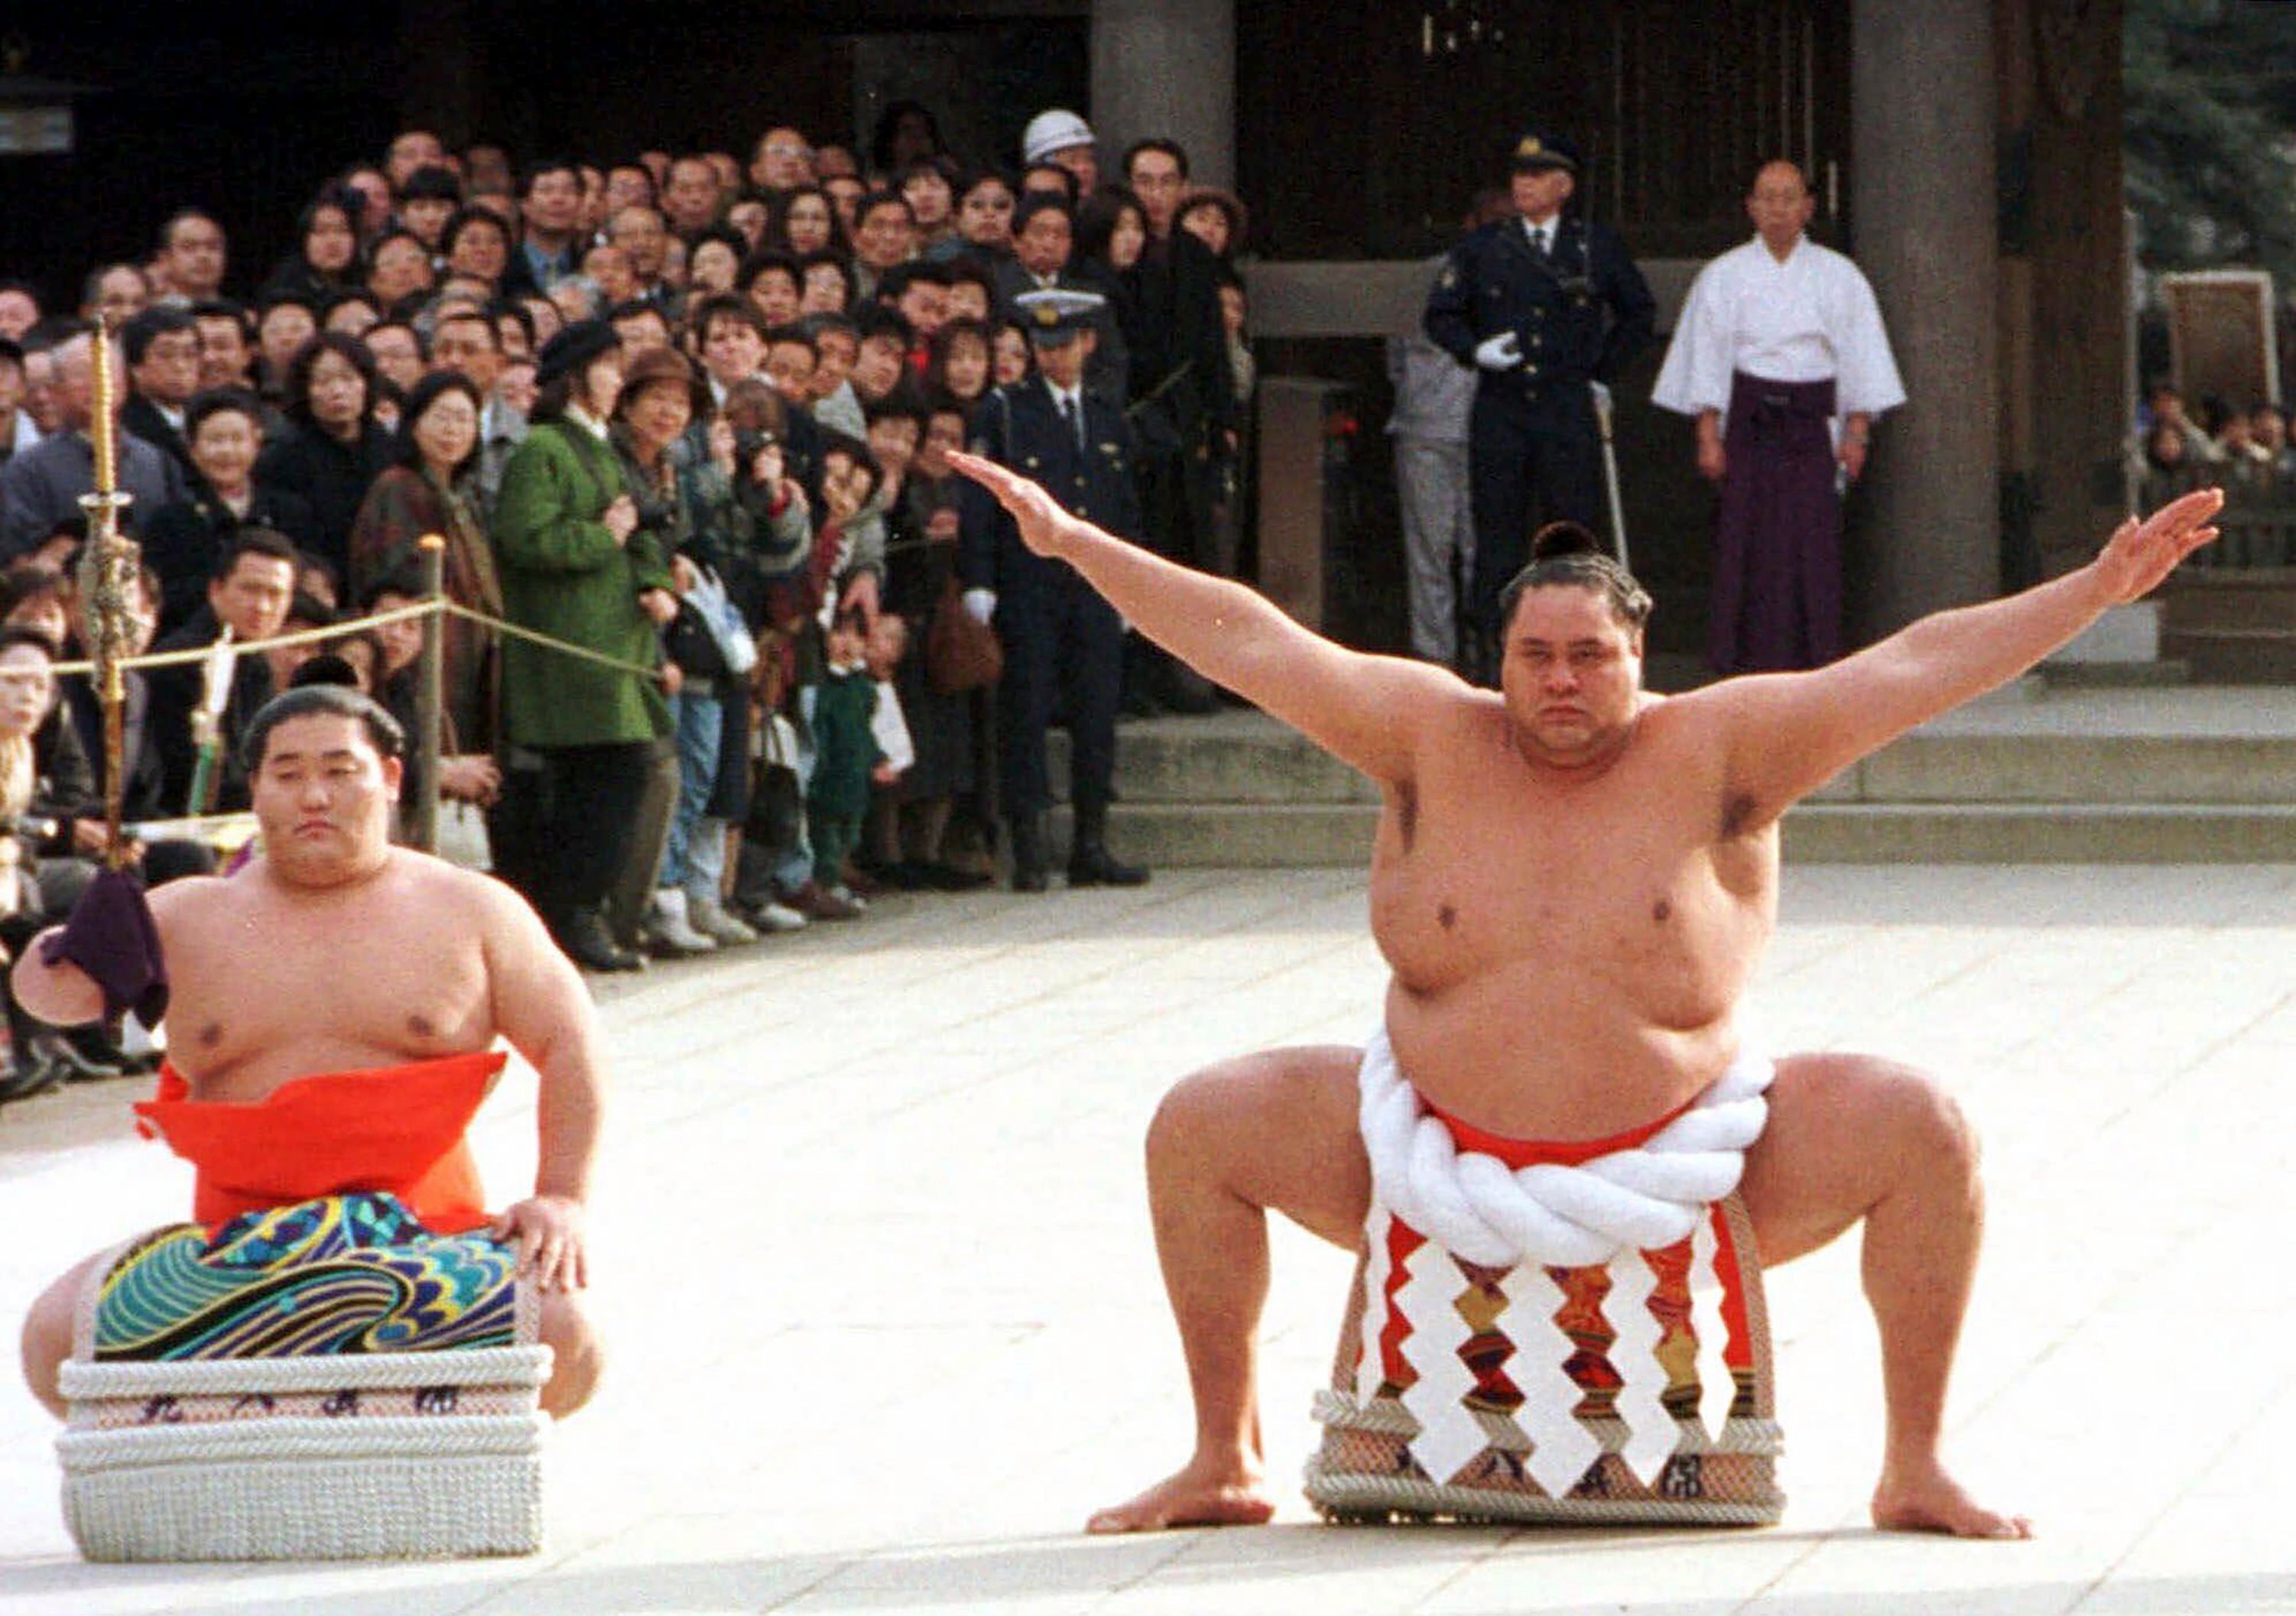 Accompanied by a sword-bearer, grand champion Akebono performs the ring-entrance ritual during the annual New Year's dedication at Meiji Shrine in Tokyo, on Jan. 8, 1997